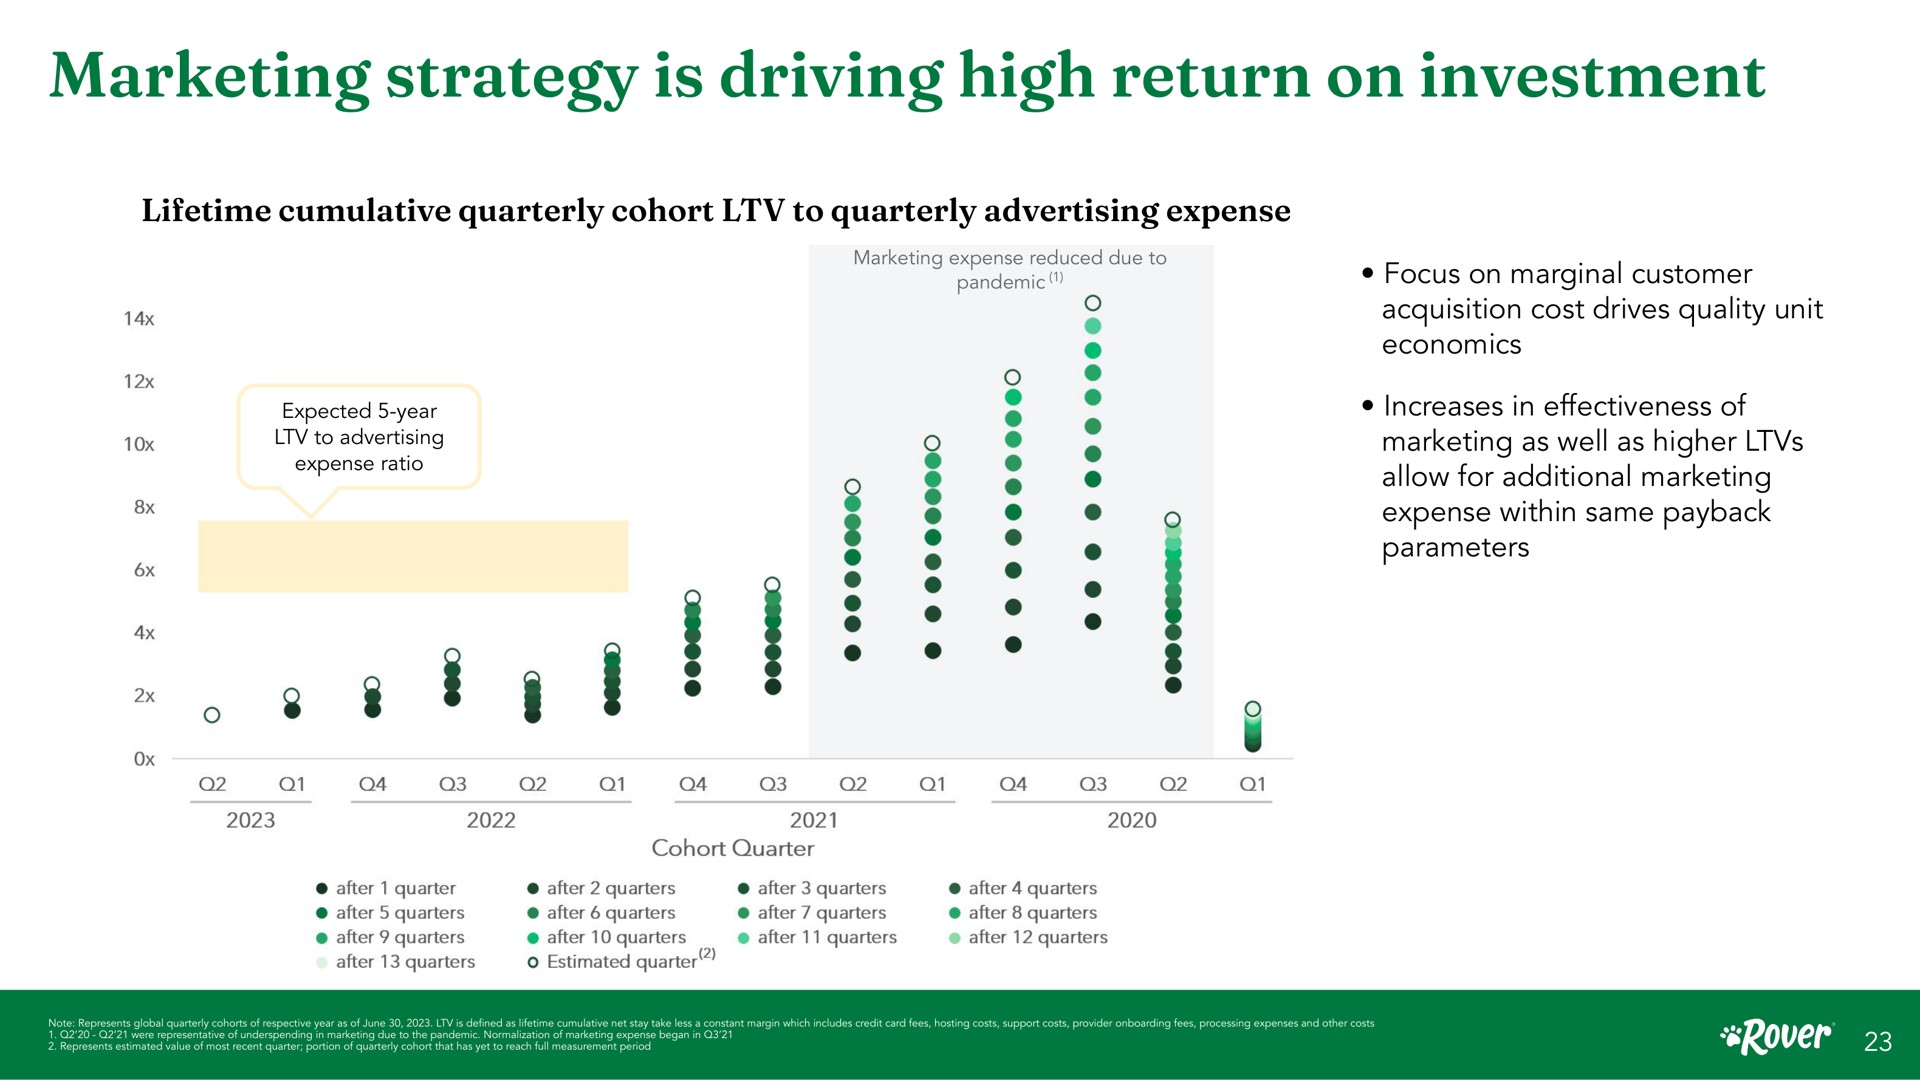 marketing strategy is driving high return on investment lifetime cumulative quarterly cohort to quarterly advertising expense expense reduced due to expected year to advertising expense ratio cohort quarter a focus marginal customer acquisition cost drives quality unit economics increases in effectiveness of as well as higher allow for additional back expense within same parameters after quarter after quarters after quarters after quarters after quarters after quarters after quarters estimated quarter after quarters after quarters after quarters after quarters after quarters after quarters teen eta in sere nea tal fare | Rover